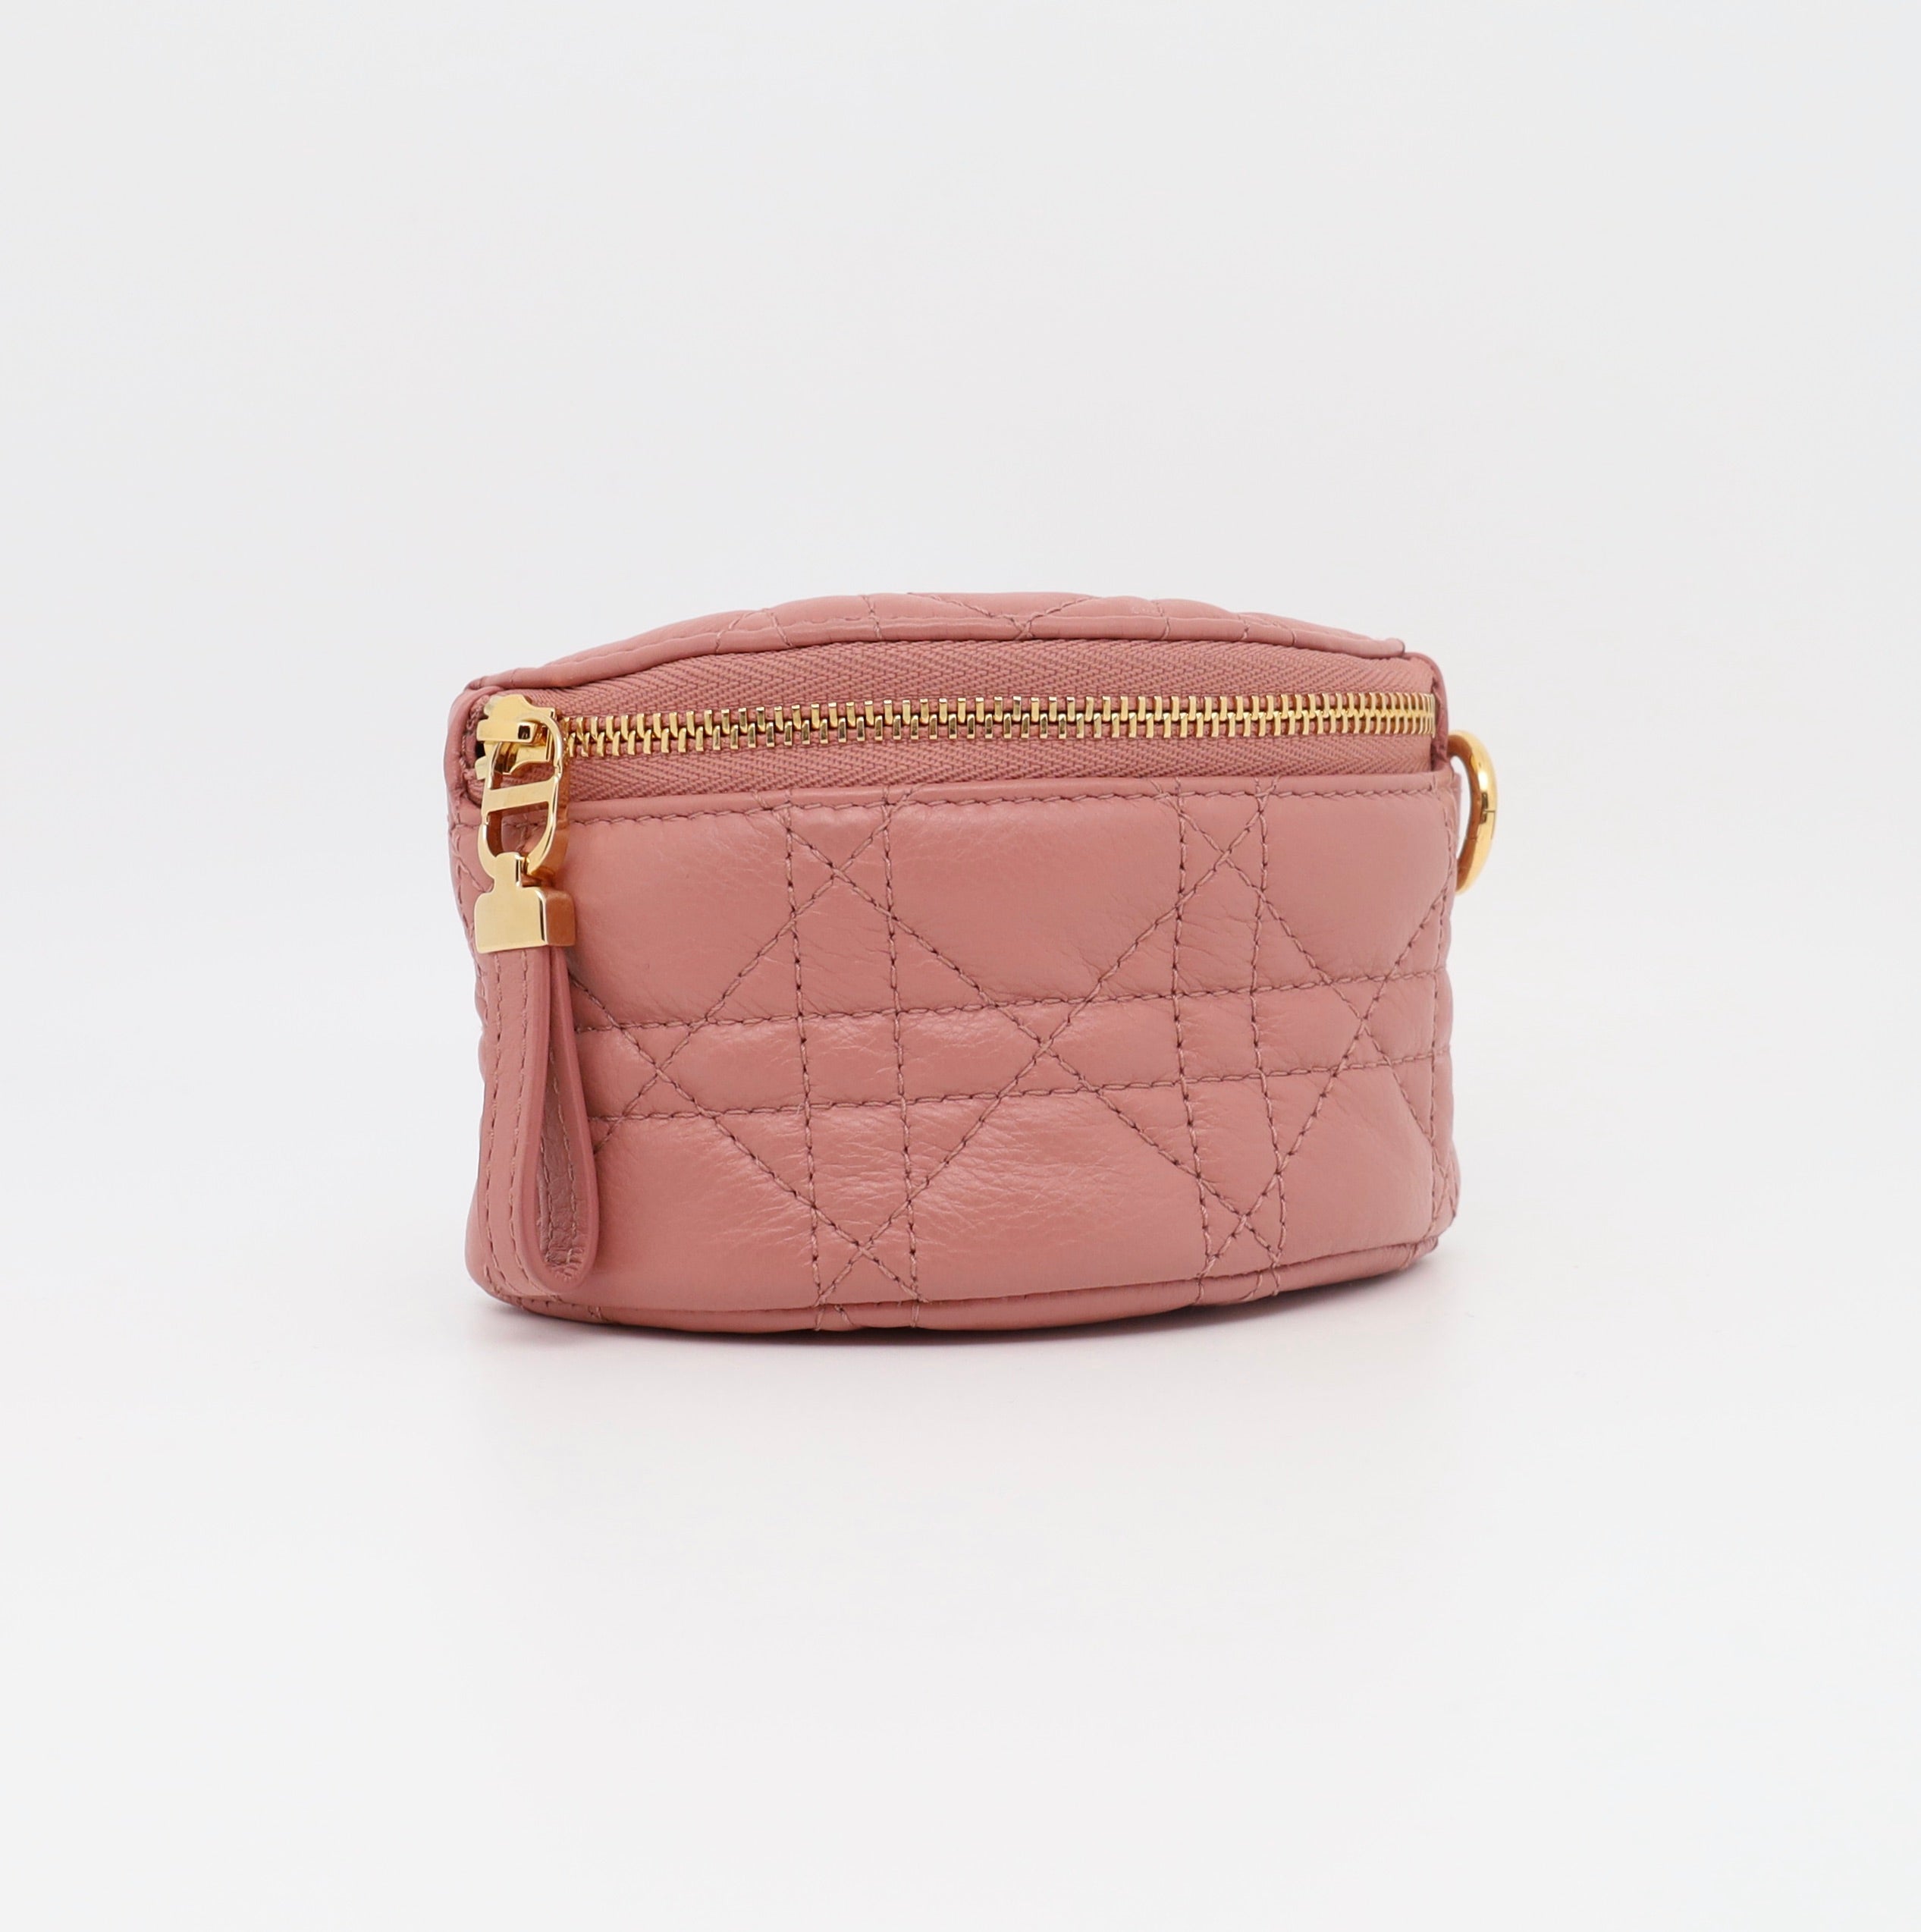 Half Moon-Shaped Pouch in Deep Nude (Pink)